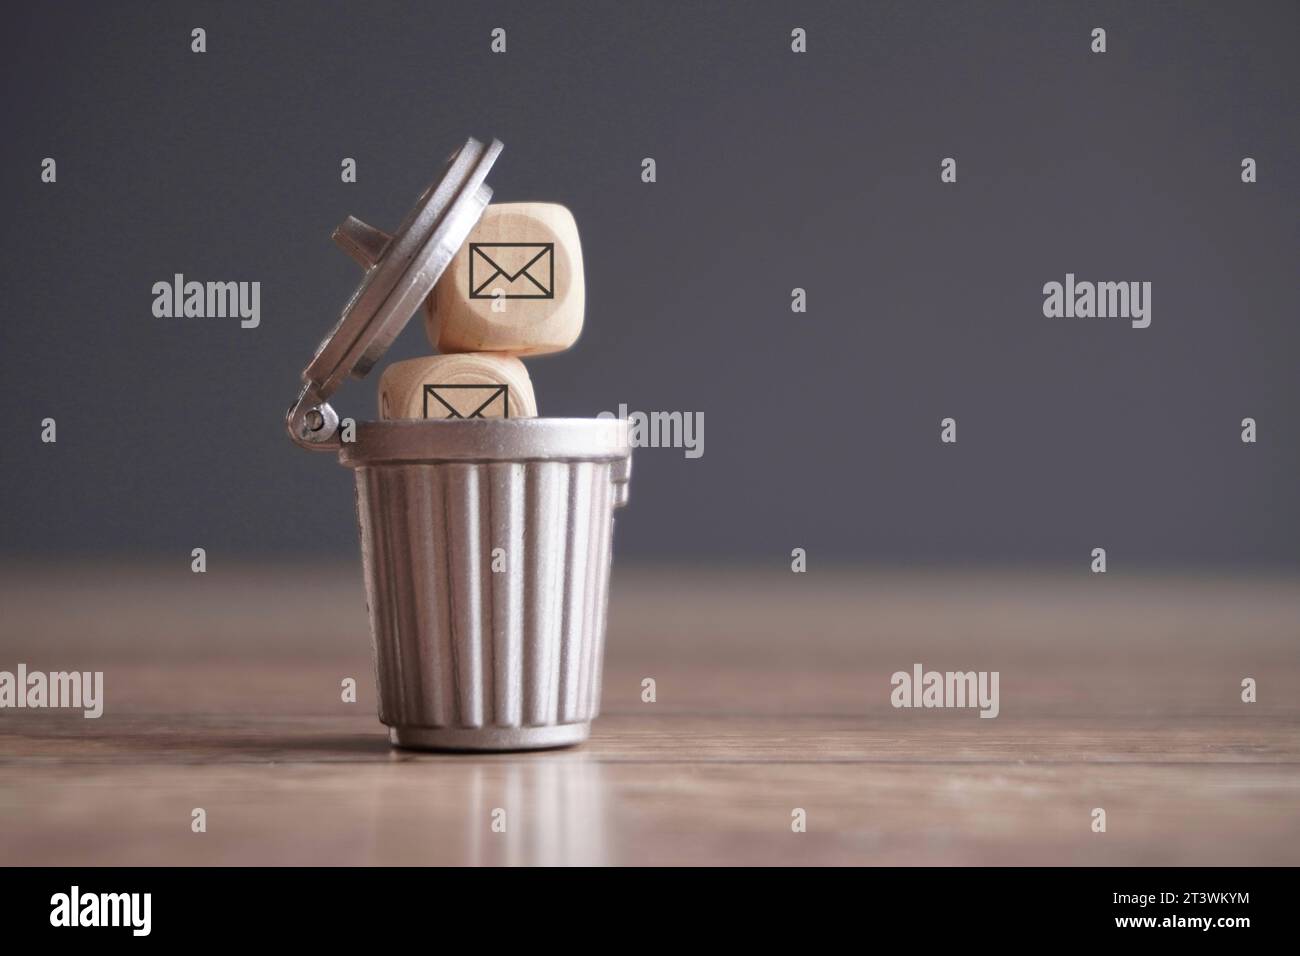 Closeup image of wooden cube with mail icon inside trash can. Junk mail and spam mail concept. Stock Photo